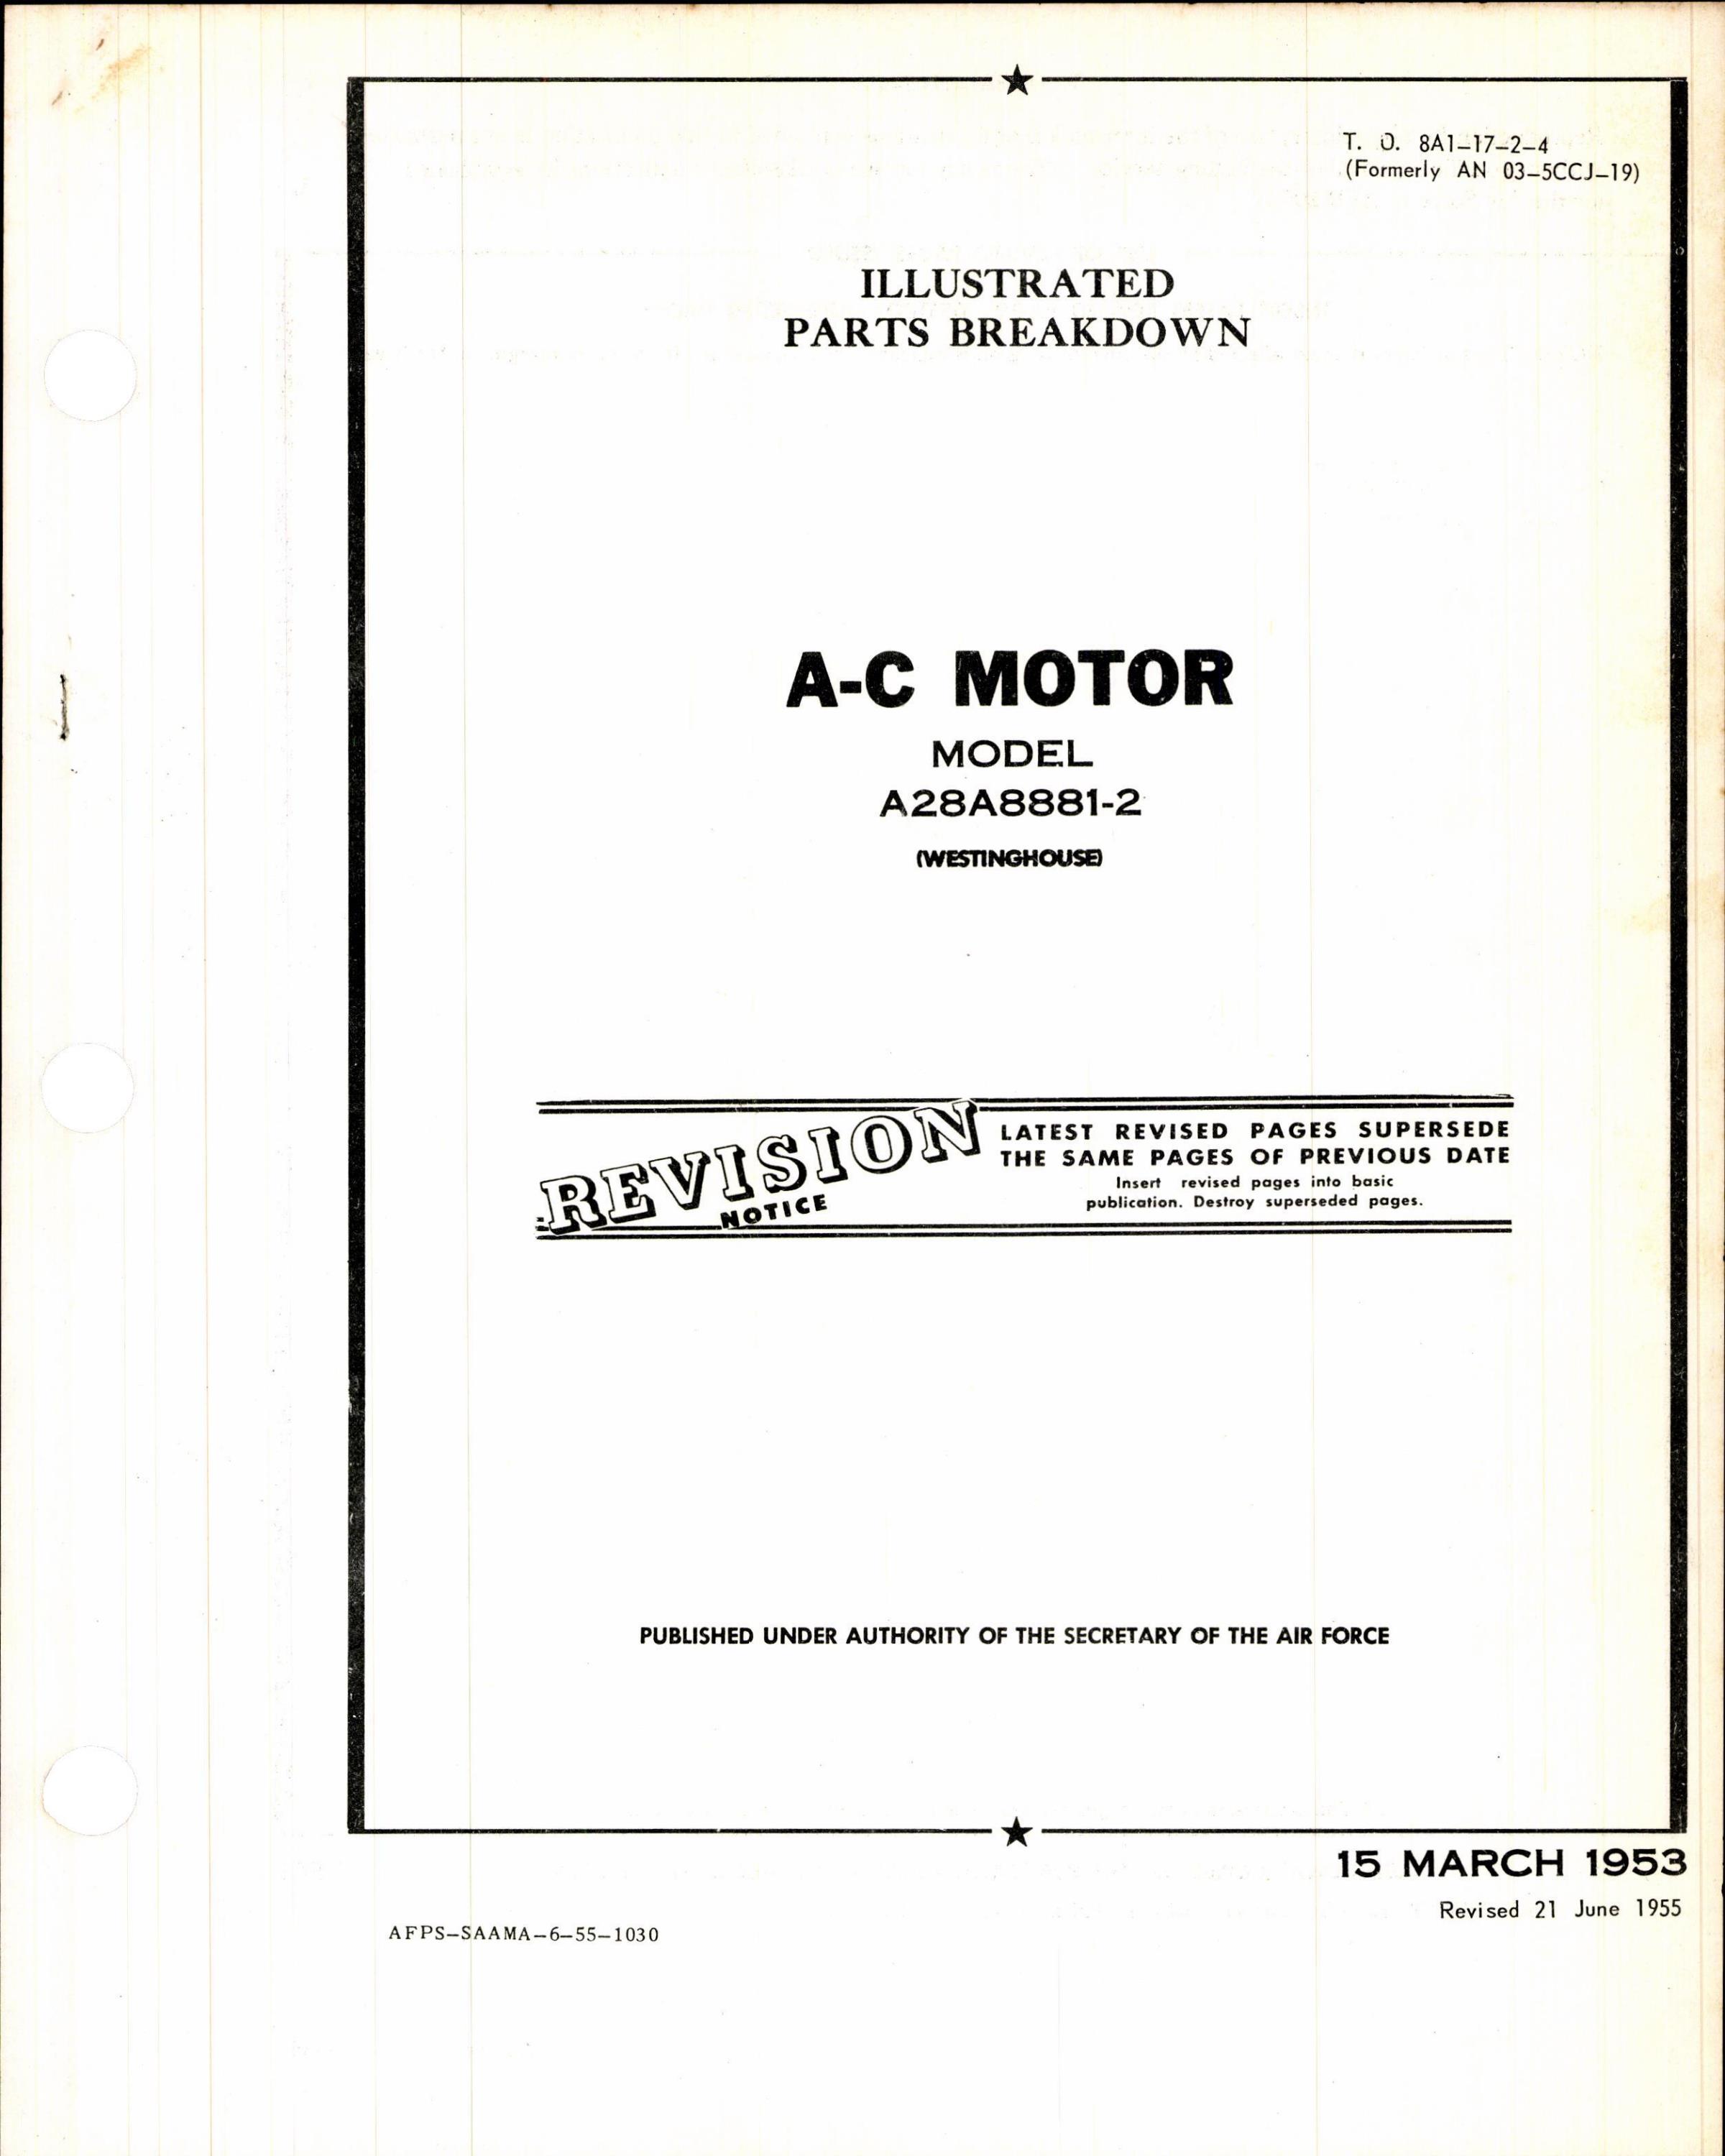 Sample page 1 from AirCorps Library document: Illustrated Parts Breakdown for Westinghouse Model A28A8881-2 A-C Motor